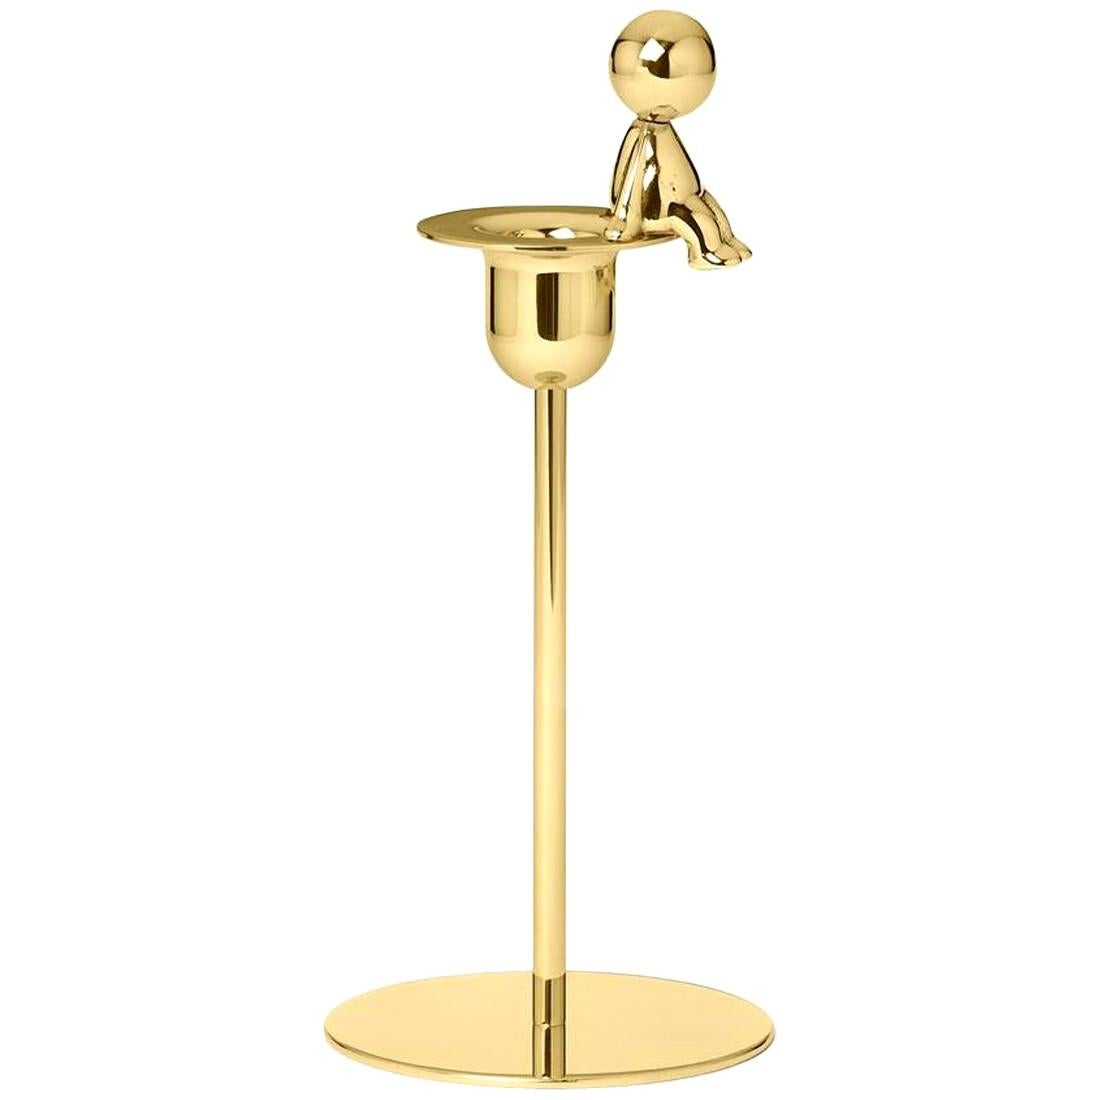 Ghidini 1961 Omini the Thinker Short Candlestick in Brass by Stefano Giovannoni